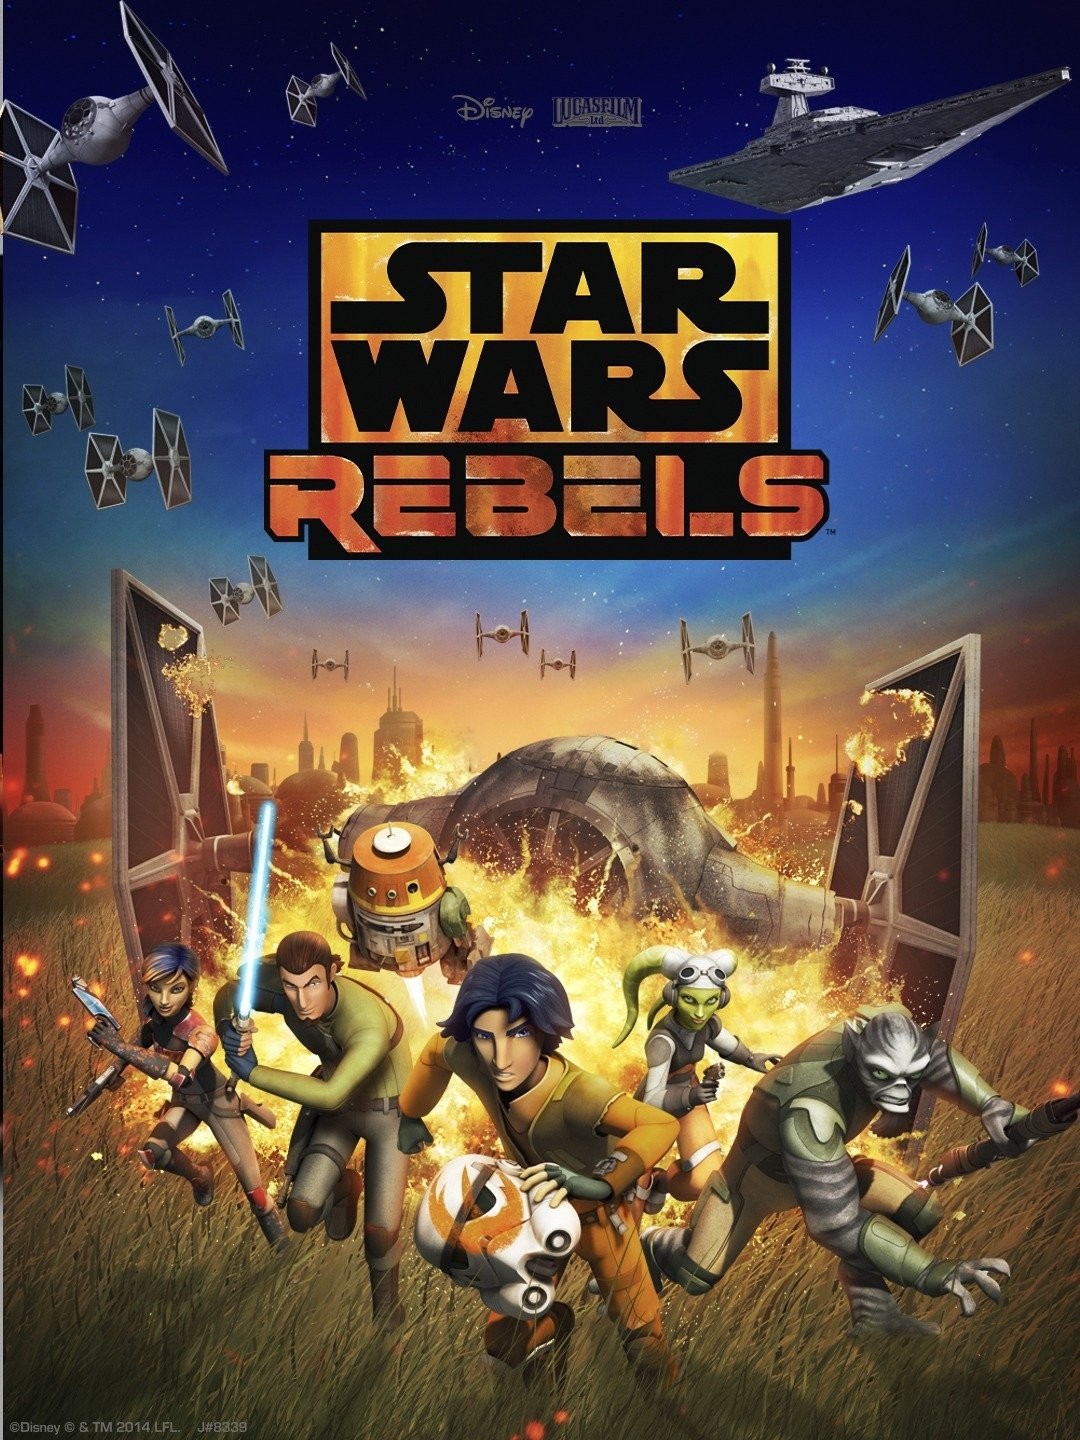 When does Star Wars Rebels take place?